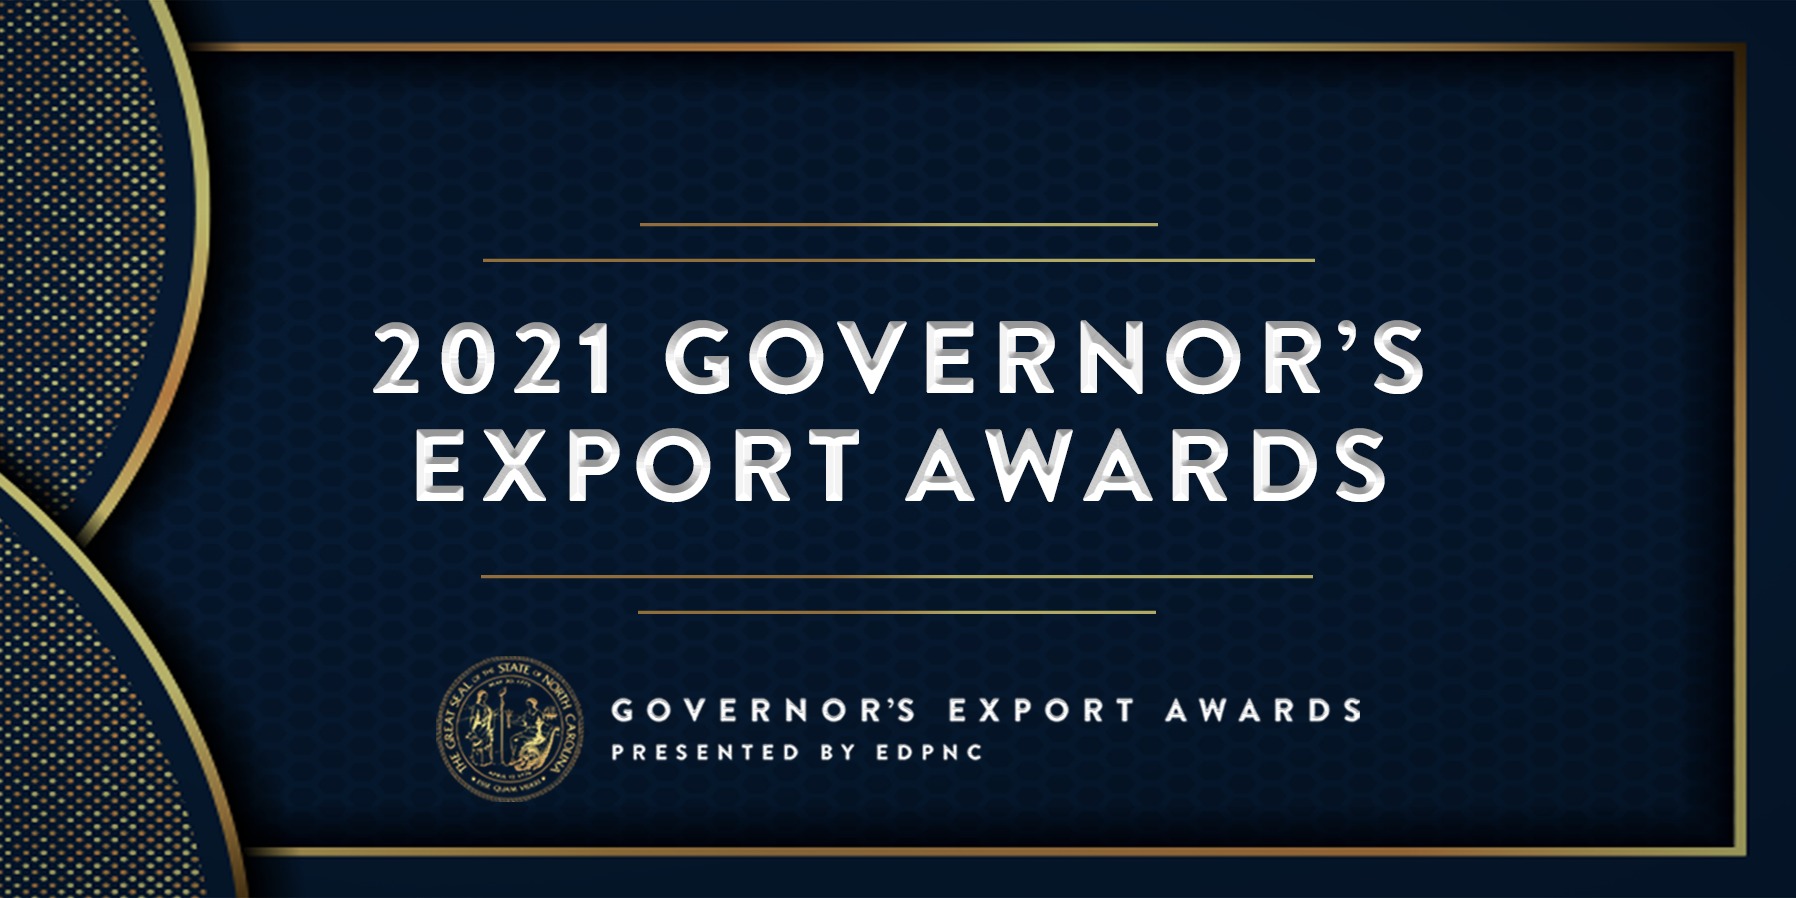 2021 Governor’s Export Award Winners Announced